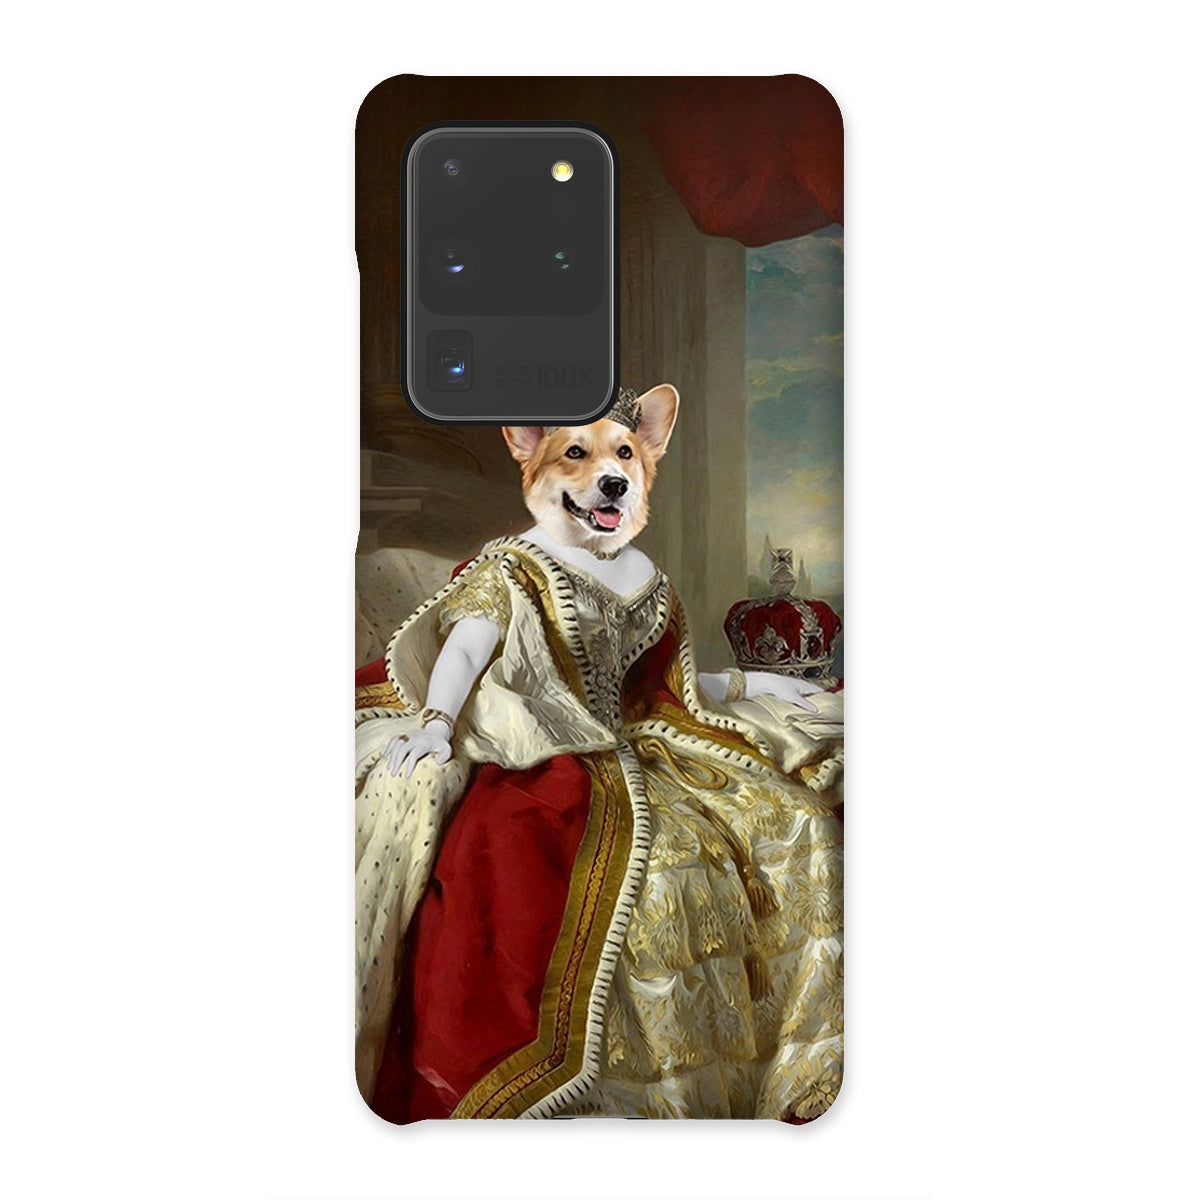 The Queen: Custom Pet Phone Case: Paw & Glory,pawandglory,dog phone case, painting of pets, portrait of pet from photo, dog pet poster, print pillows, paw painting with dogs